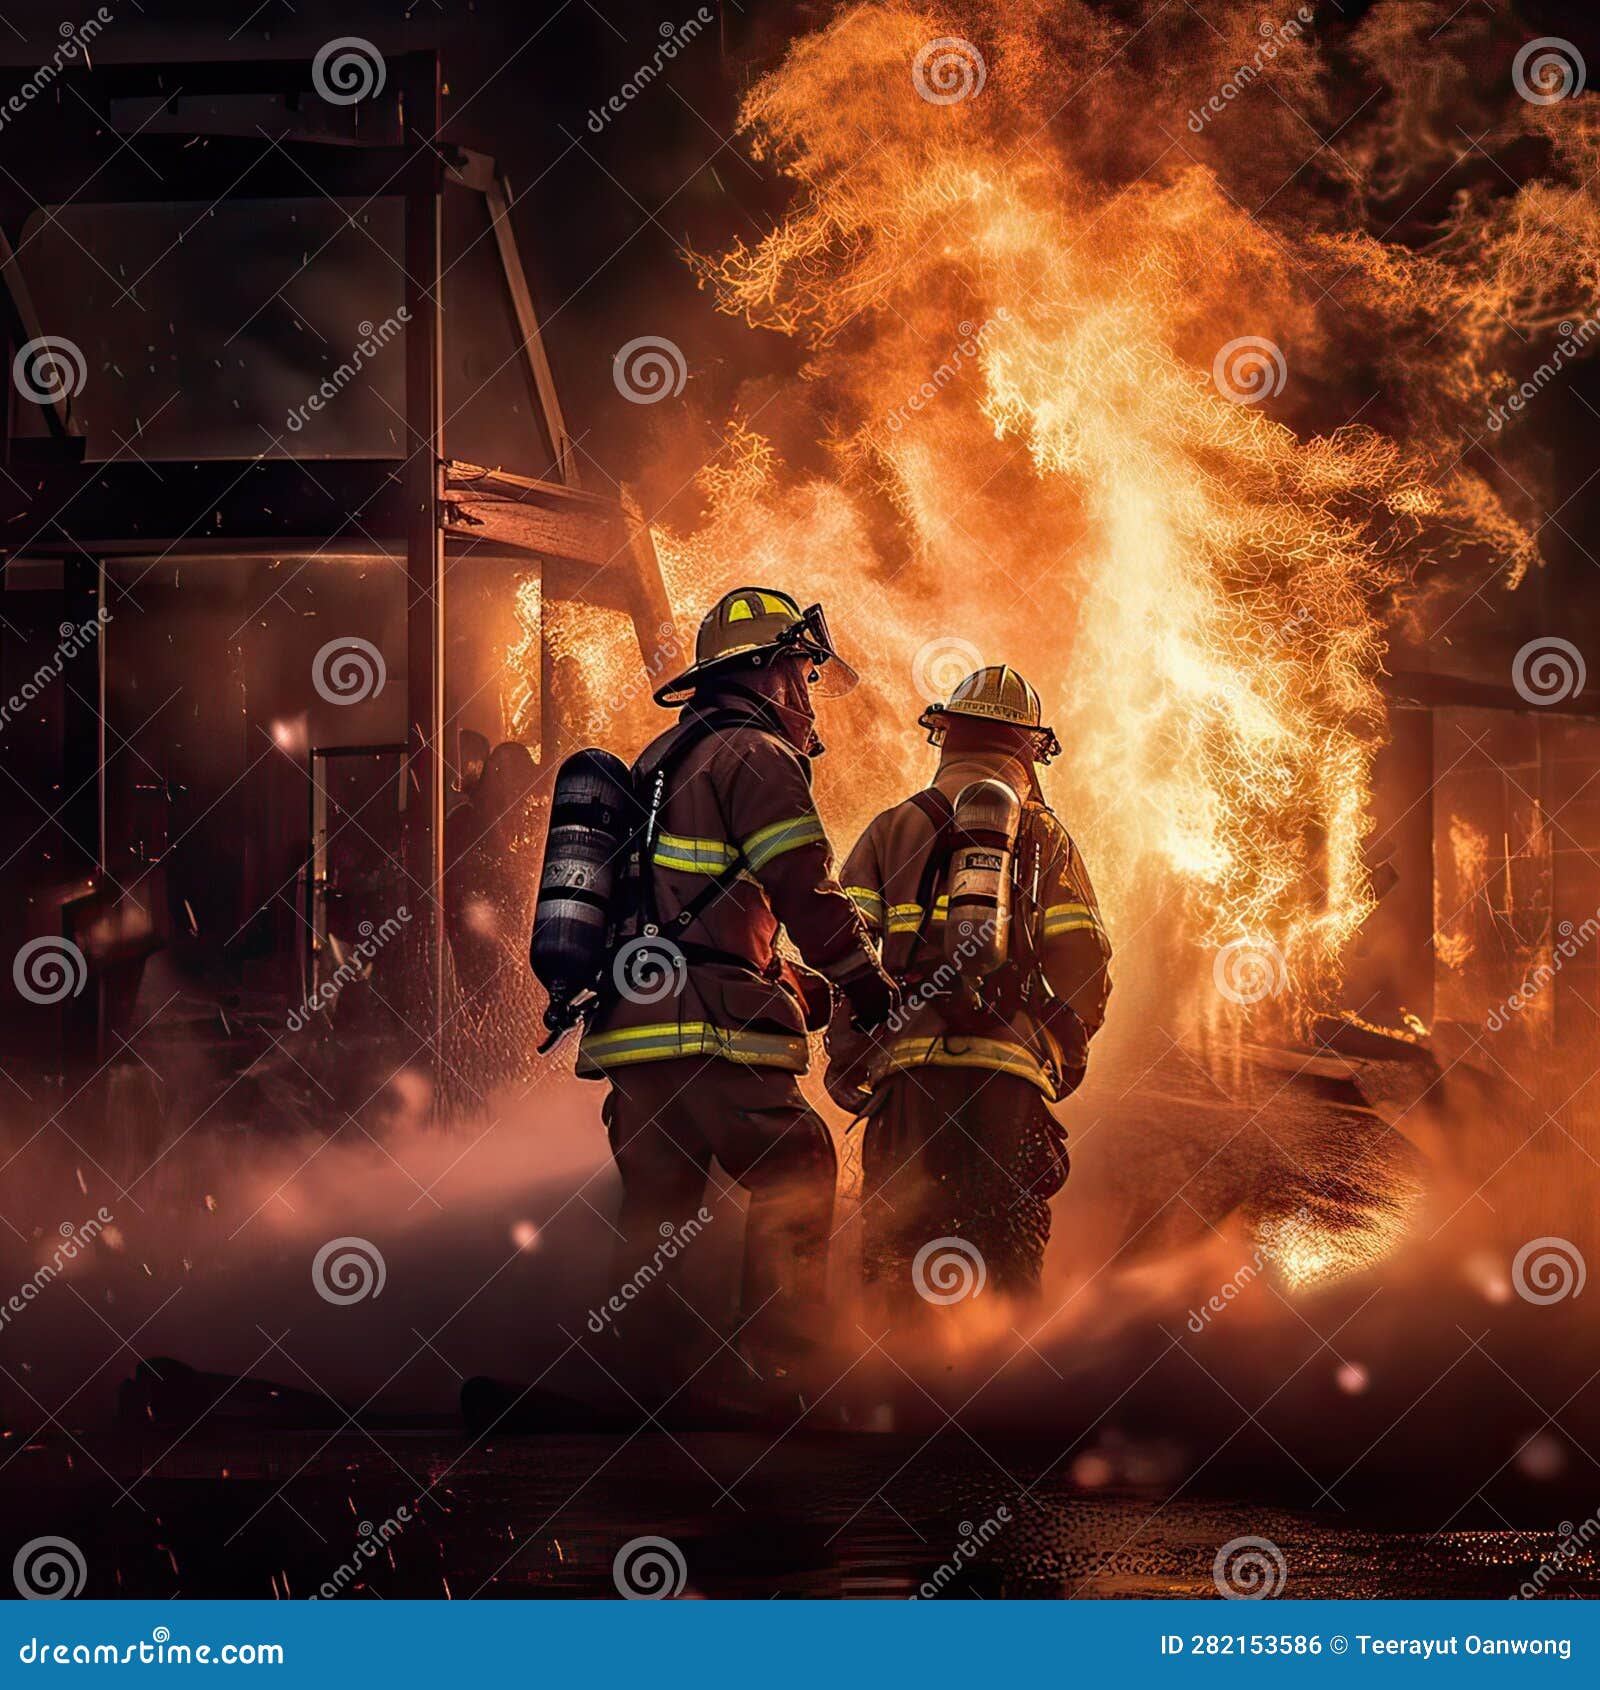 Wallpaper Background Firefighters Portrait Firemen Picture Background  Image And Wallpaper for Free Download